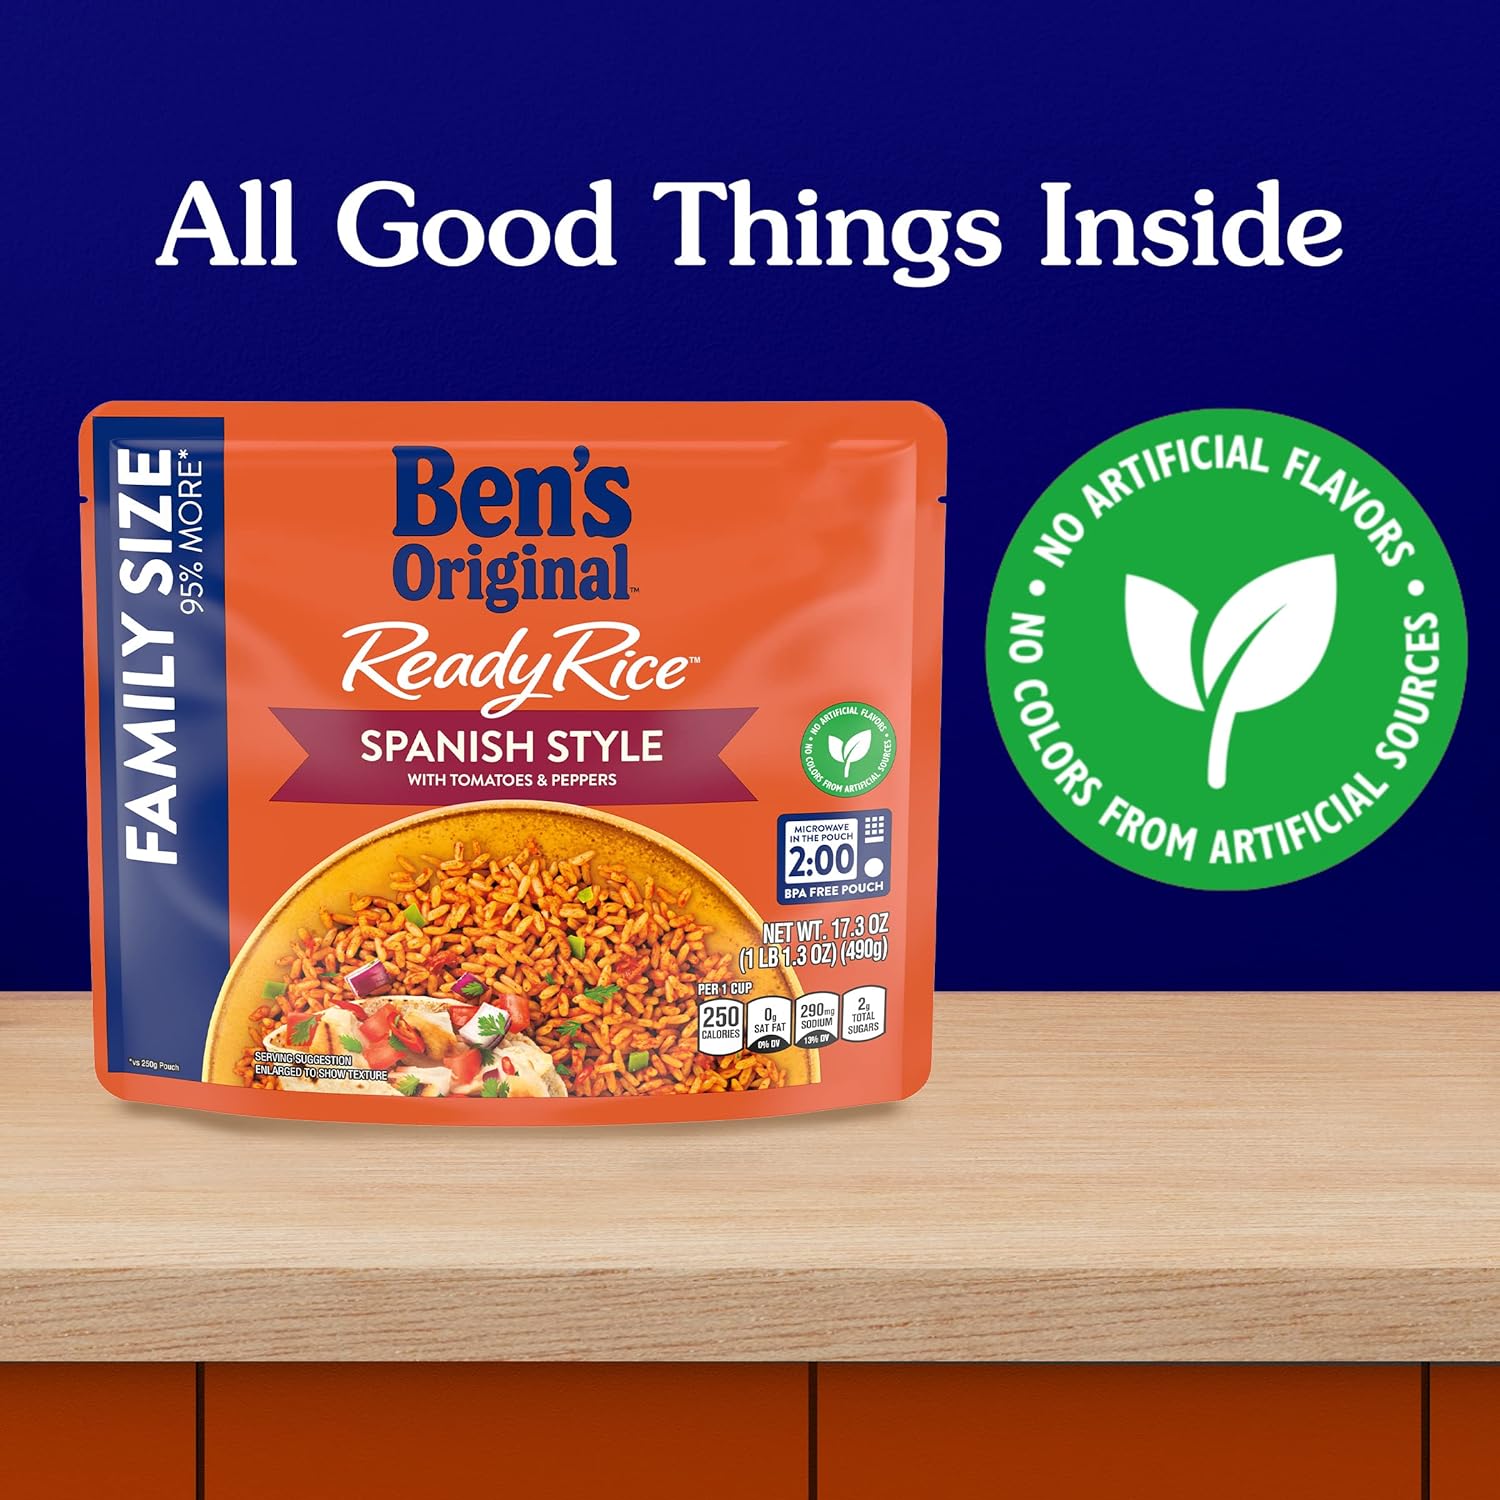 BEN'S ORIGINAL READY RICE Spanish Style Flavored Rice, Family Size, Easy Dinner Side, 17.3 OZ Pouch (Pack of 6) : Everything Else